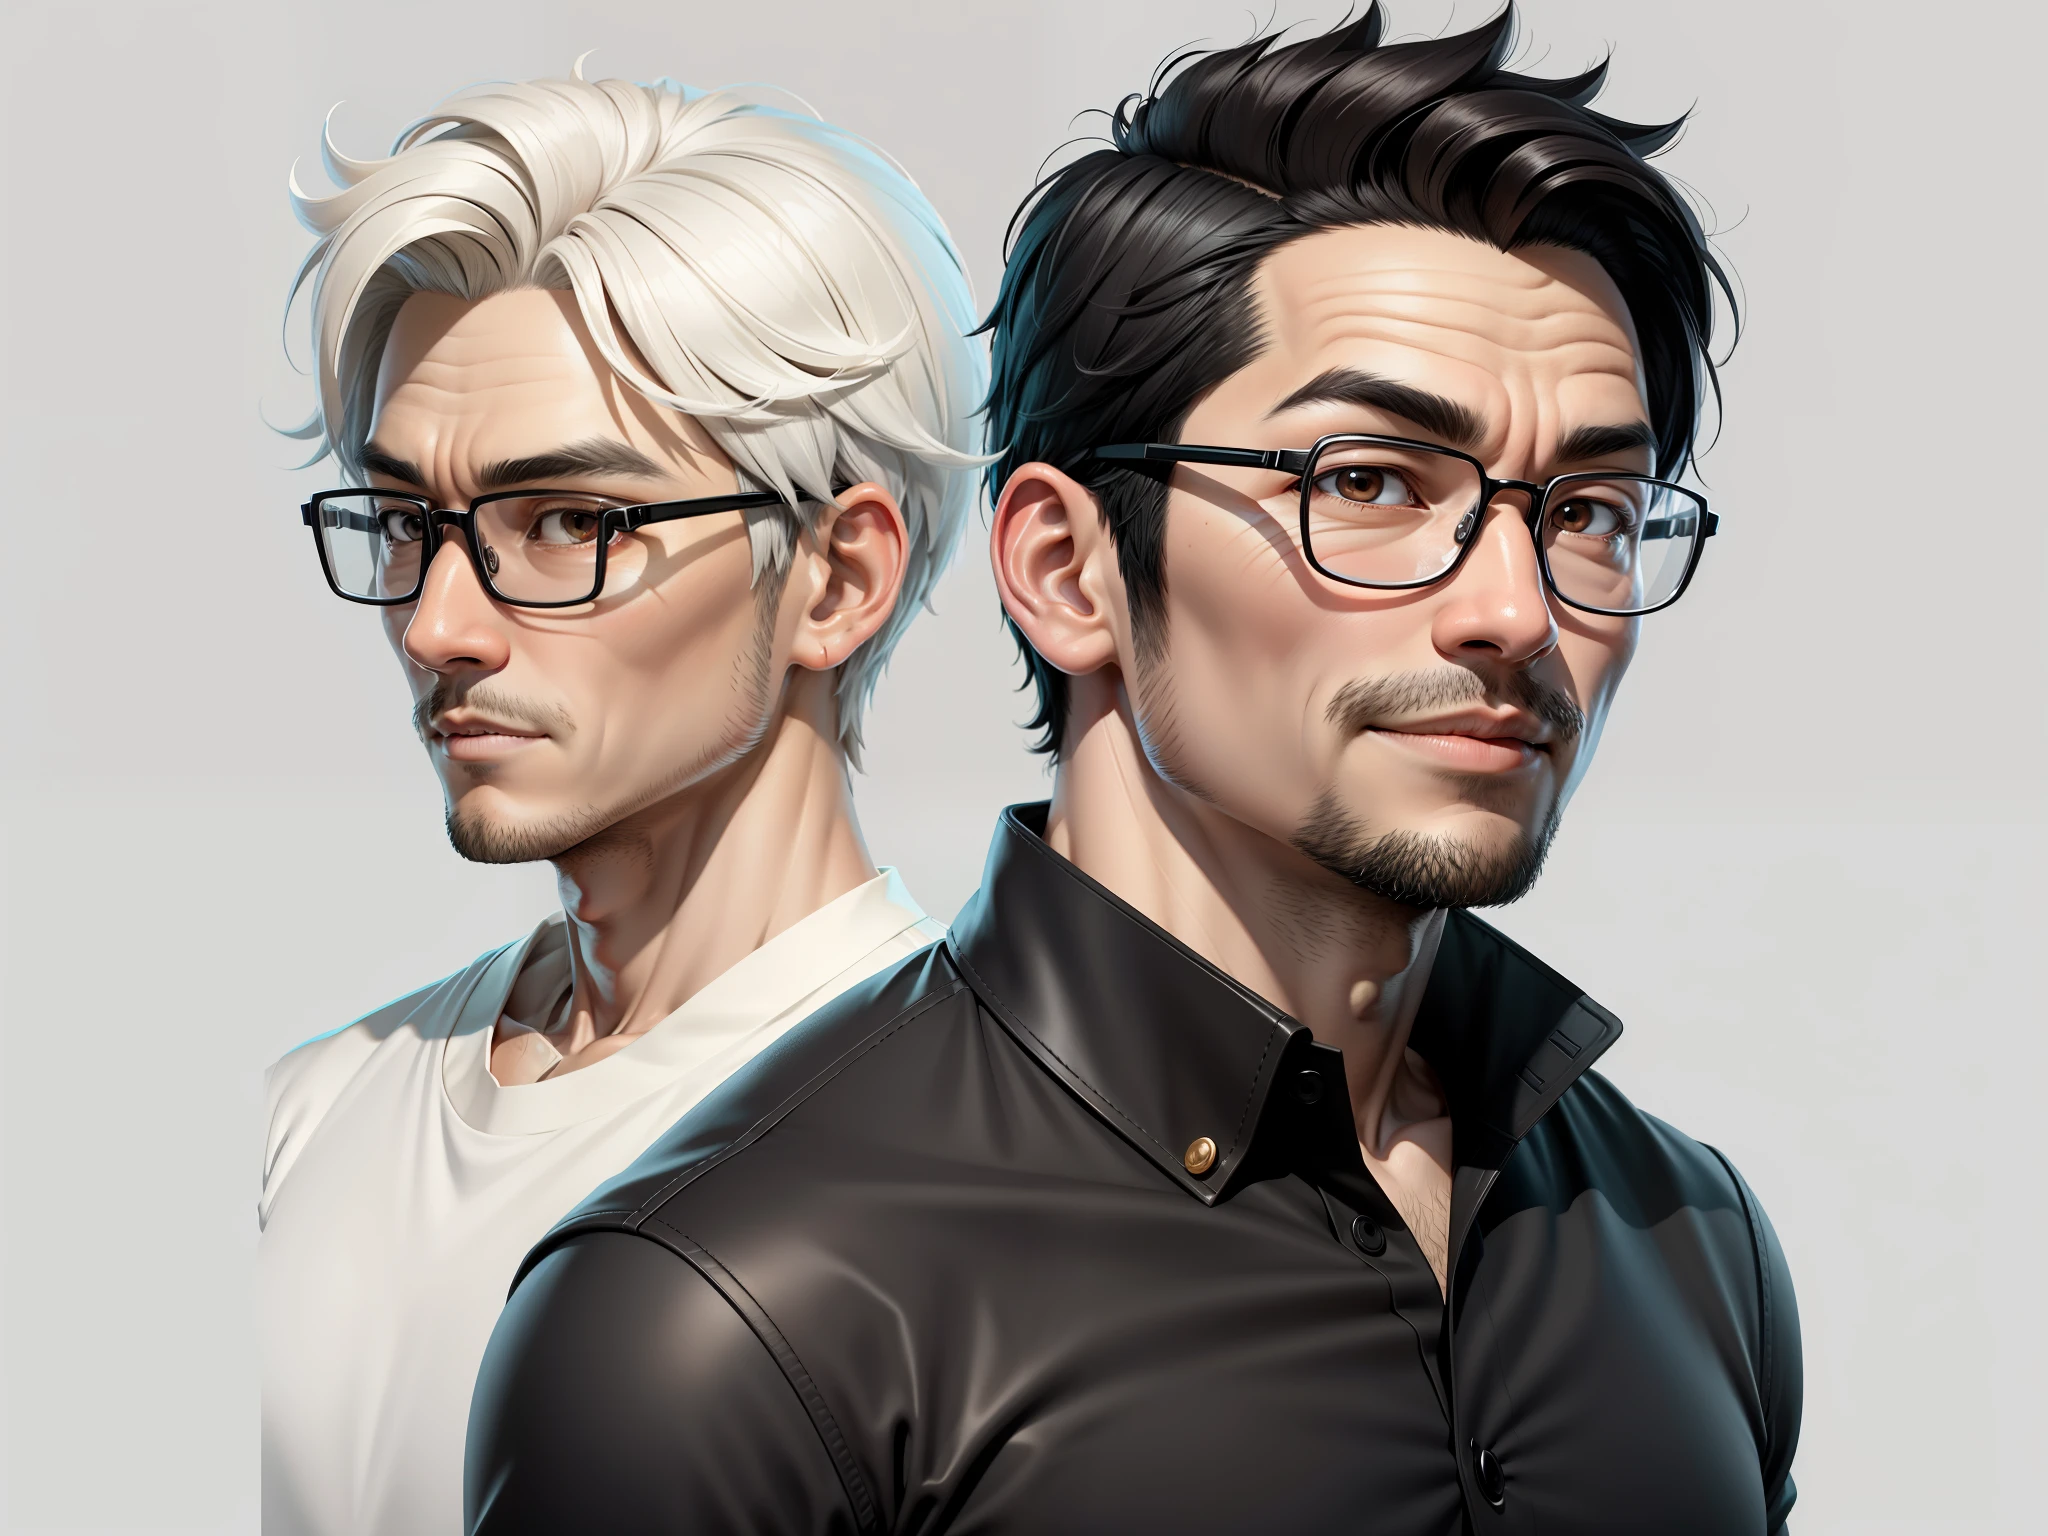 Super young, Japanese man, 35 years old, silver glasses, slightly chubby face, clean face, no beard on chin, black super short hair, black eyes, confident smile, polo cedar, digital painting, film, 3D character design by Mark Claireden and Pixar and Hayao Miyazaki, the illustration is HD illustration in 4K resolution with very detailed facial features and cartoon-style visuals.